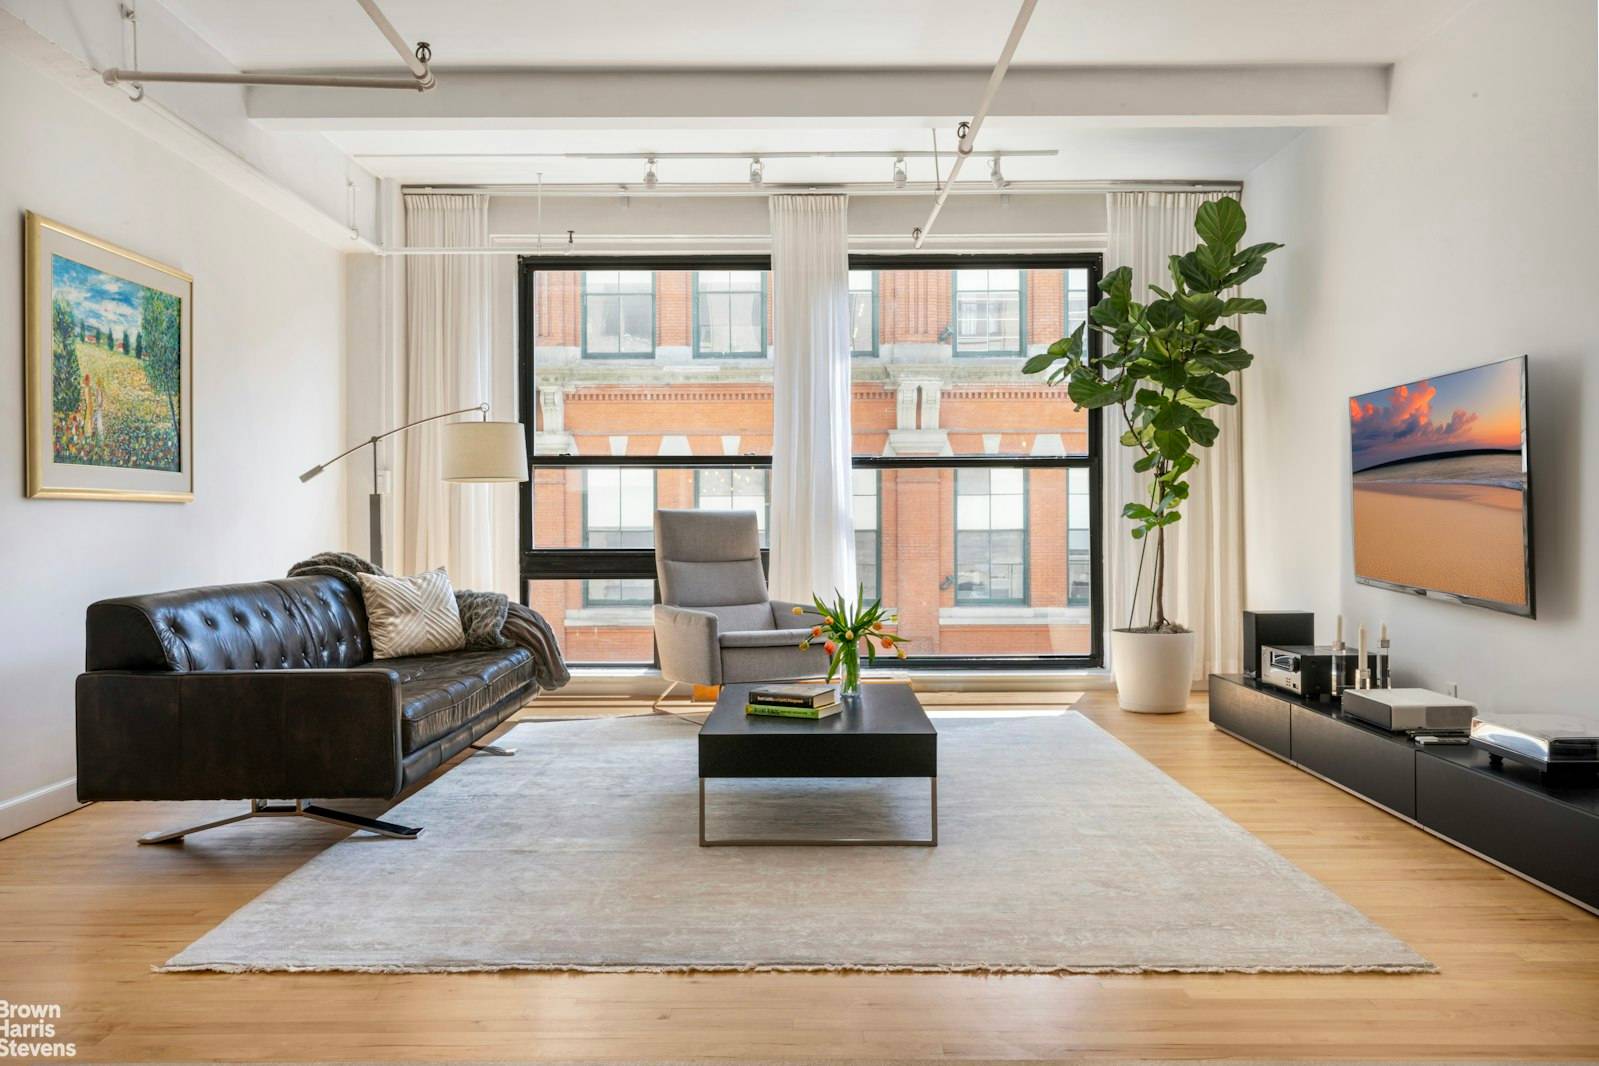 On the cusp of Flatiron and Gramercy, just north of vibrant Union Square Park, this incredible loft awaits its next owner.